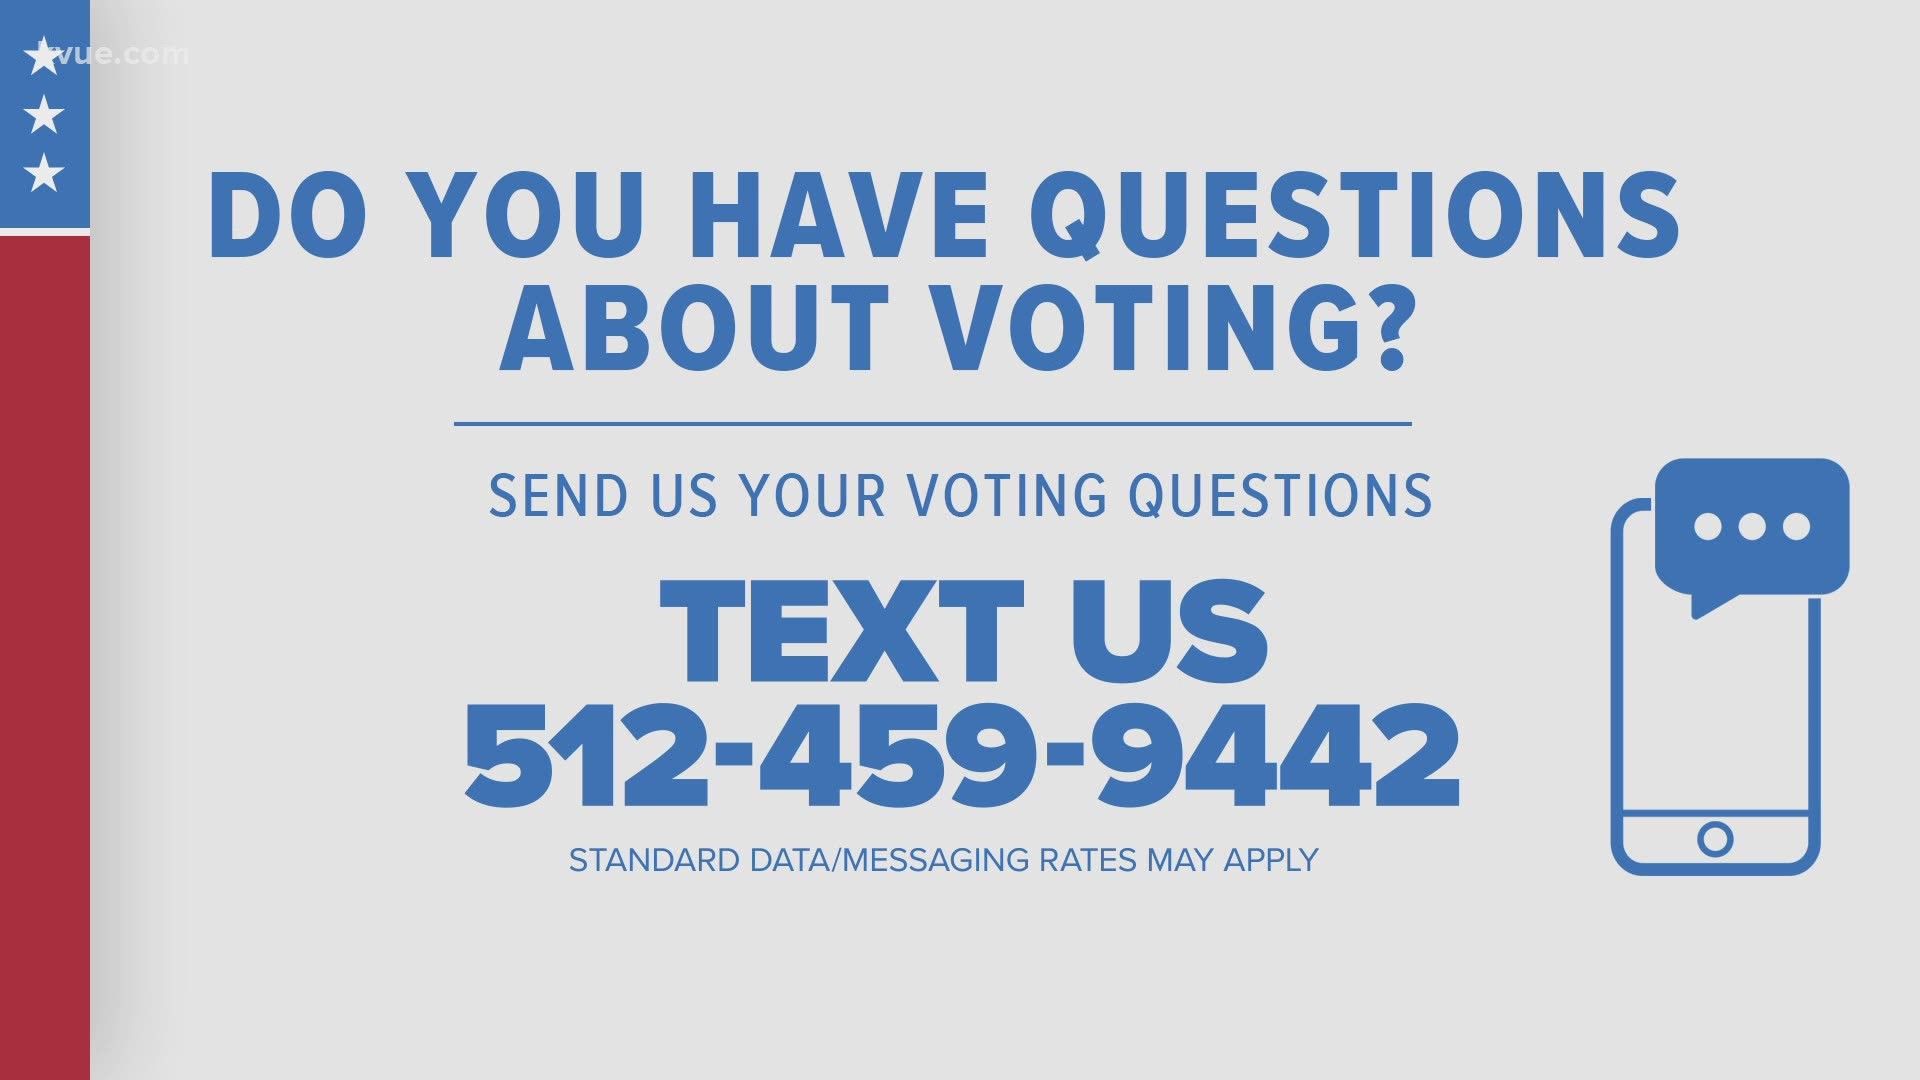 The KVUE Defenders are continuing to answer your election questions. If you have a question you'd like KVUE to answer, text 512-459-9442.